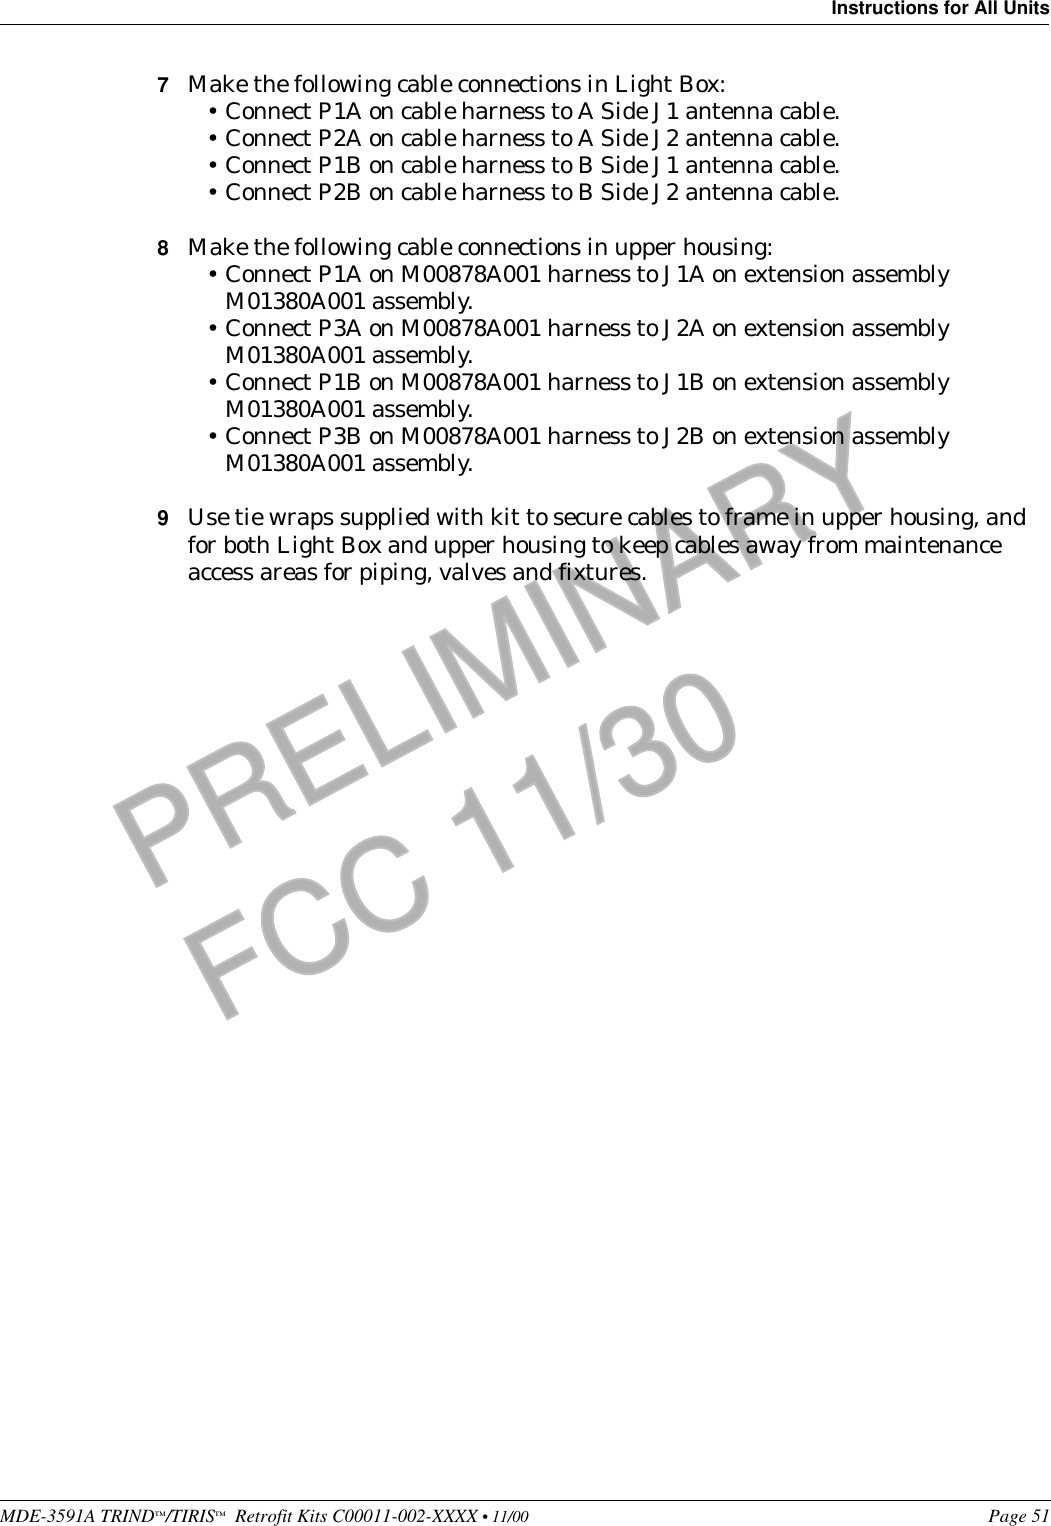 MDE-3591A TRIND™/TIRIS™  Retrofit Kits C00011-002-XXXX • 11/00 Page 51Instructions for All UnitsPRELIMINARYFCC 11/307Make the following cable connections in Light Box:•Connect P1A on cable harness to A Side J1 antenna cable.•Connect P2A on cable harness to A Side J2 antenna cable.•Connect P1B on cable harness to B Side J1 antenna cable.•Connect P2B on cable harness to B Side J2 antenna cable.8Make the following cable connections in upper housing:•Connect P1A on M00878A001 harness to J1A on extension assembly M01380A001 assembly. •Connect P3A on M00878A001 harness to J2A on extension assembly M01380A001 assembly. •Connect P1B on M00878A001 harness to J1B on extension assembly M01380A001 assembly. •Connect P3B on M00878A001 harness to J2B on extension assembly M01380A001 assembly.9Use tie wraps supplied with kit to secure cables to frame in upper housing, and for both Light Box and upper housing to keep cables away from maintenance access areas for piping, valves and fixtures. 